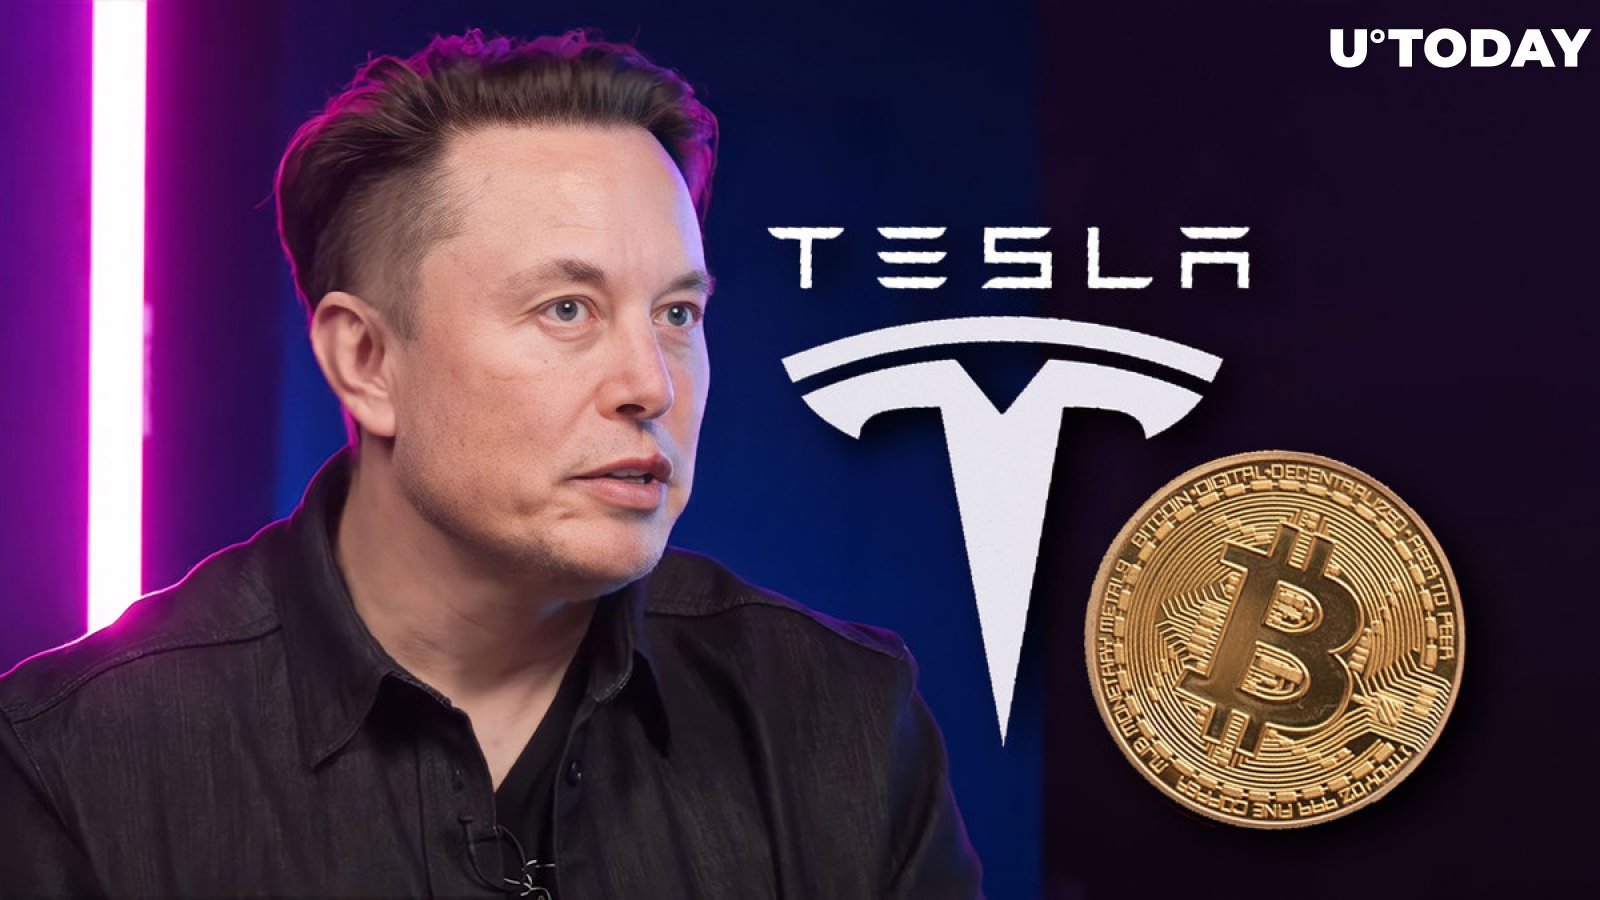 Elon Musk's Tesla Sold Bitcoin One Year Ago, Community Wonders If Repurchase Coming